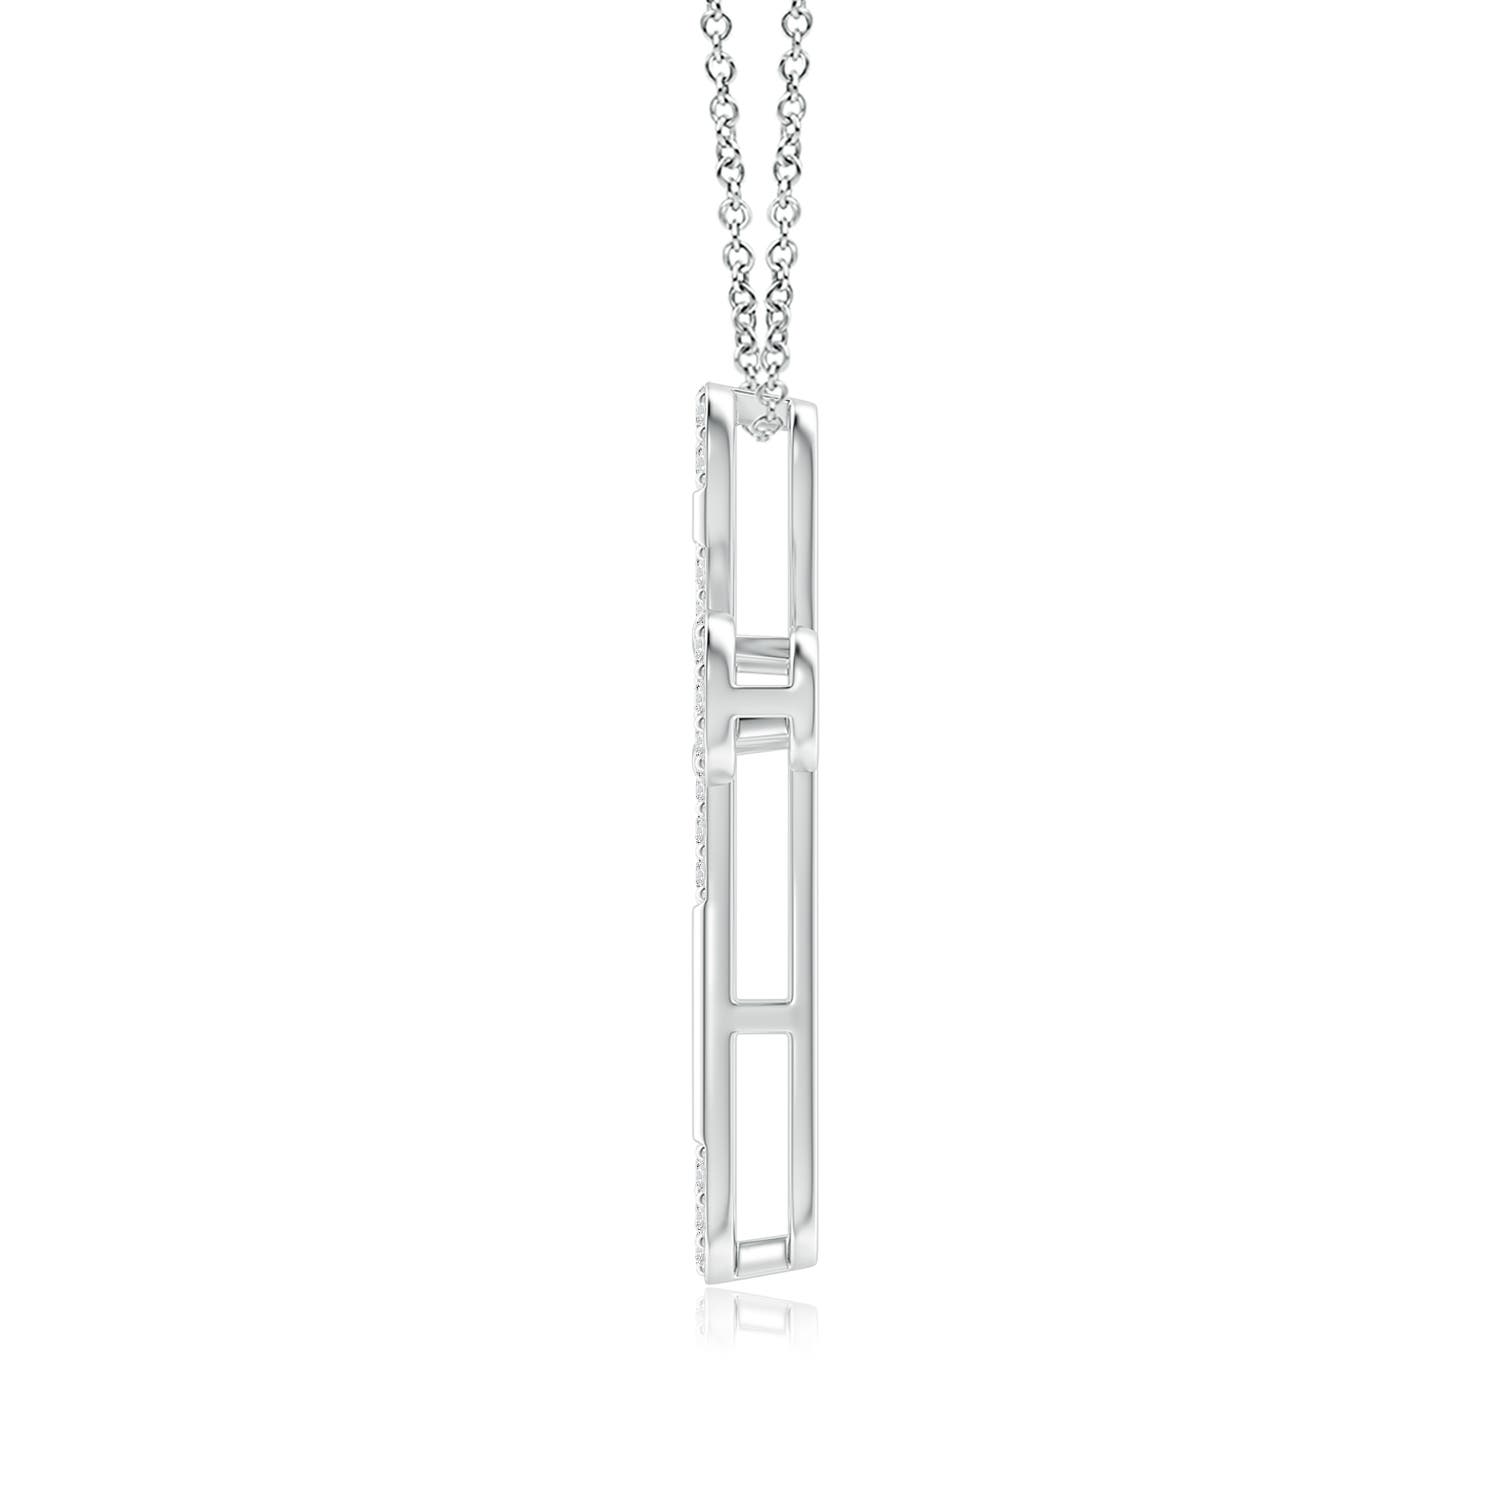 H, SI2 / 0.48 CT / 14 KT White Gold